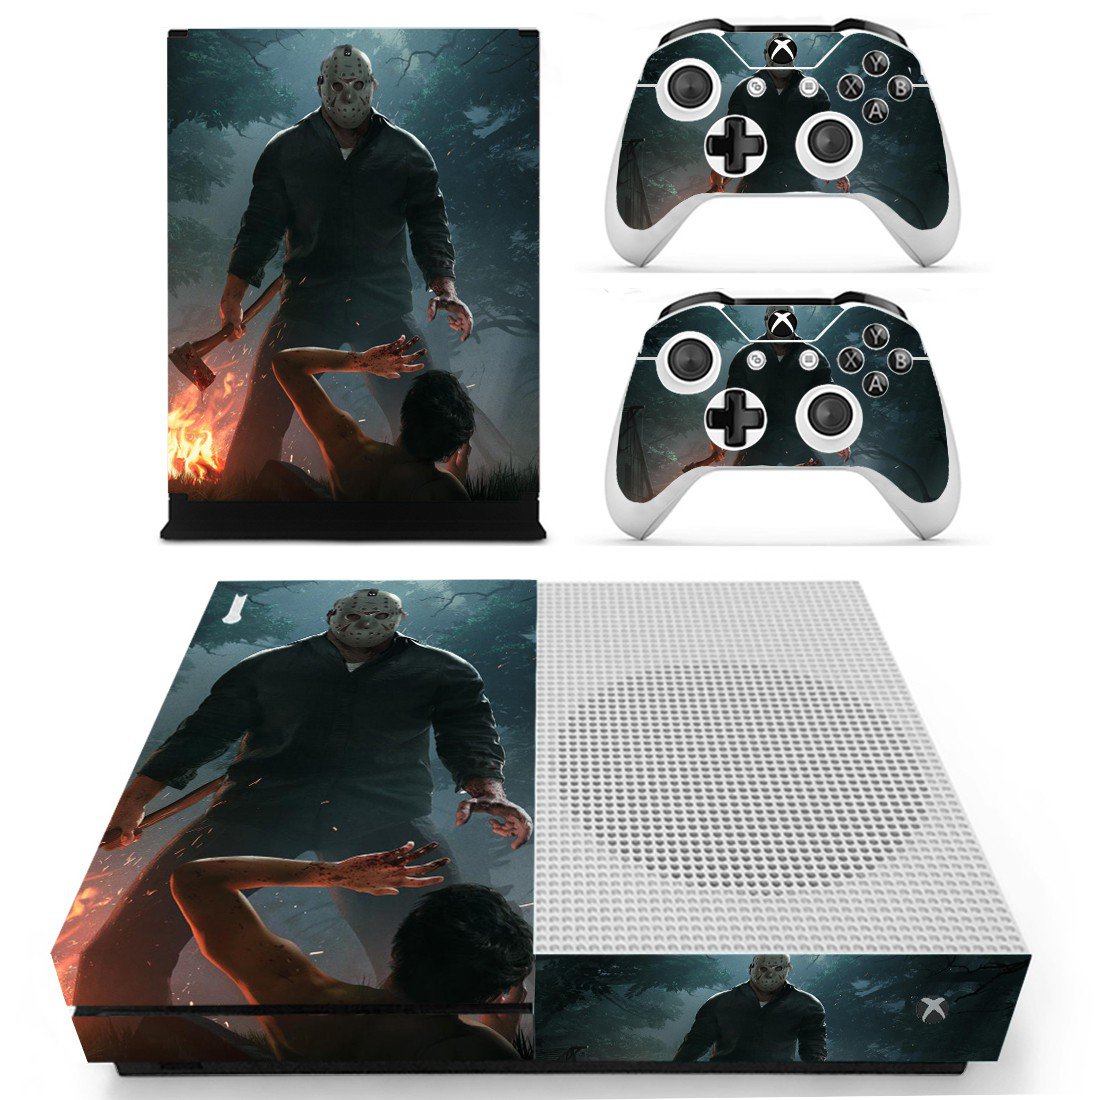 Friday the 13th Sticker For Xbox One S And Controllers